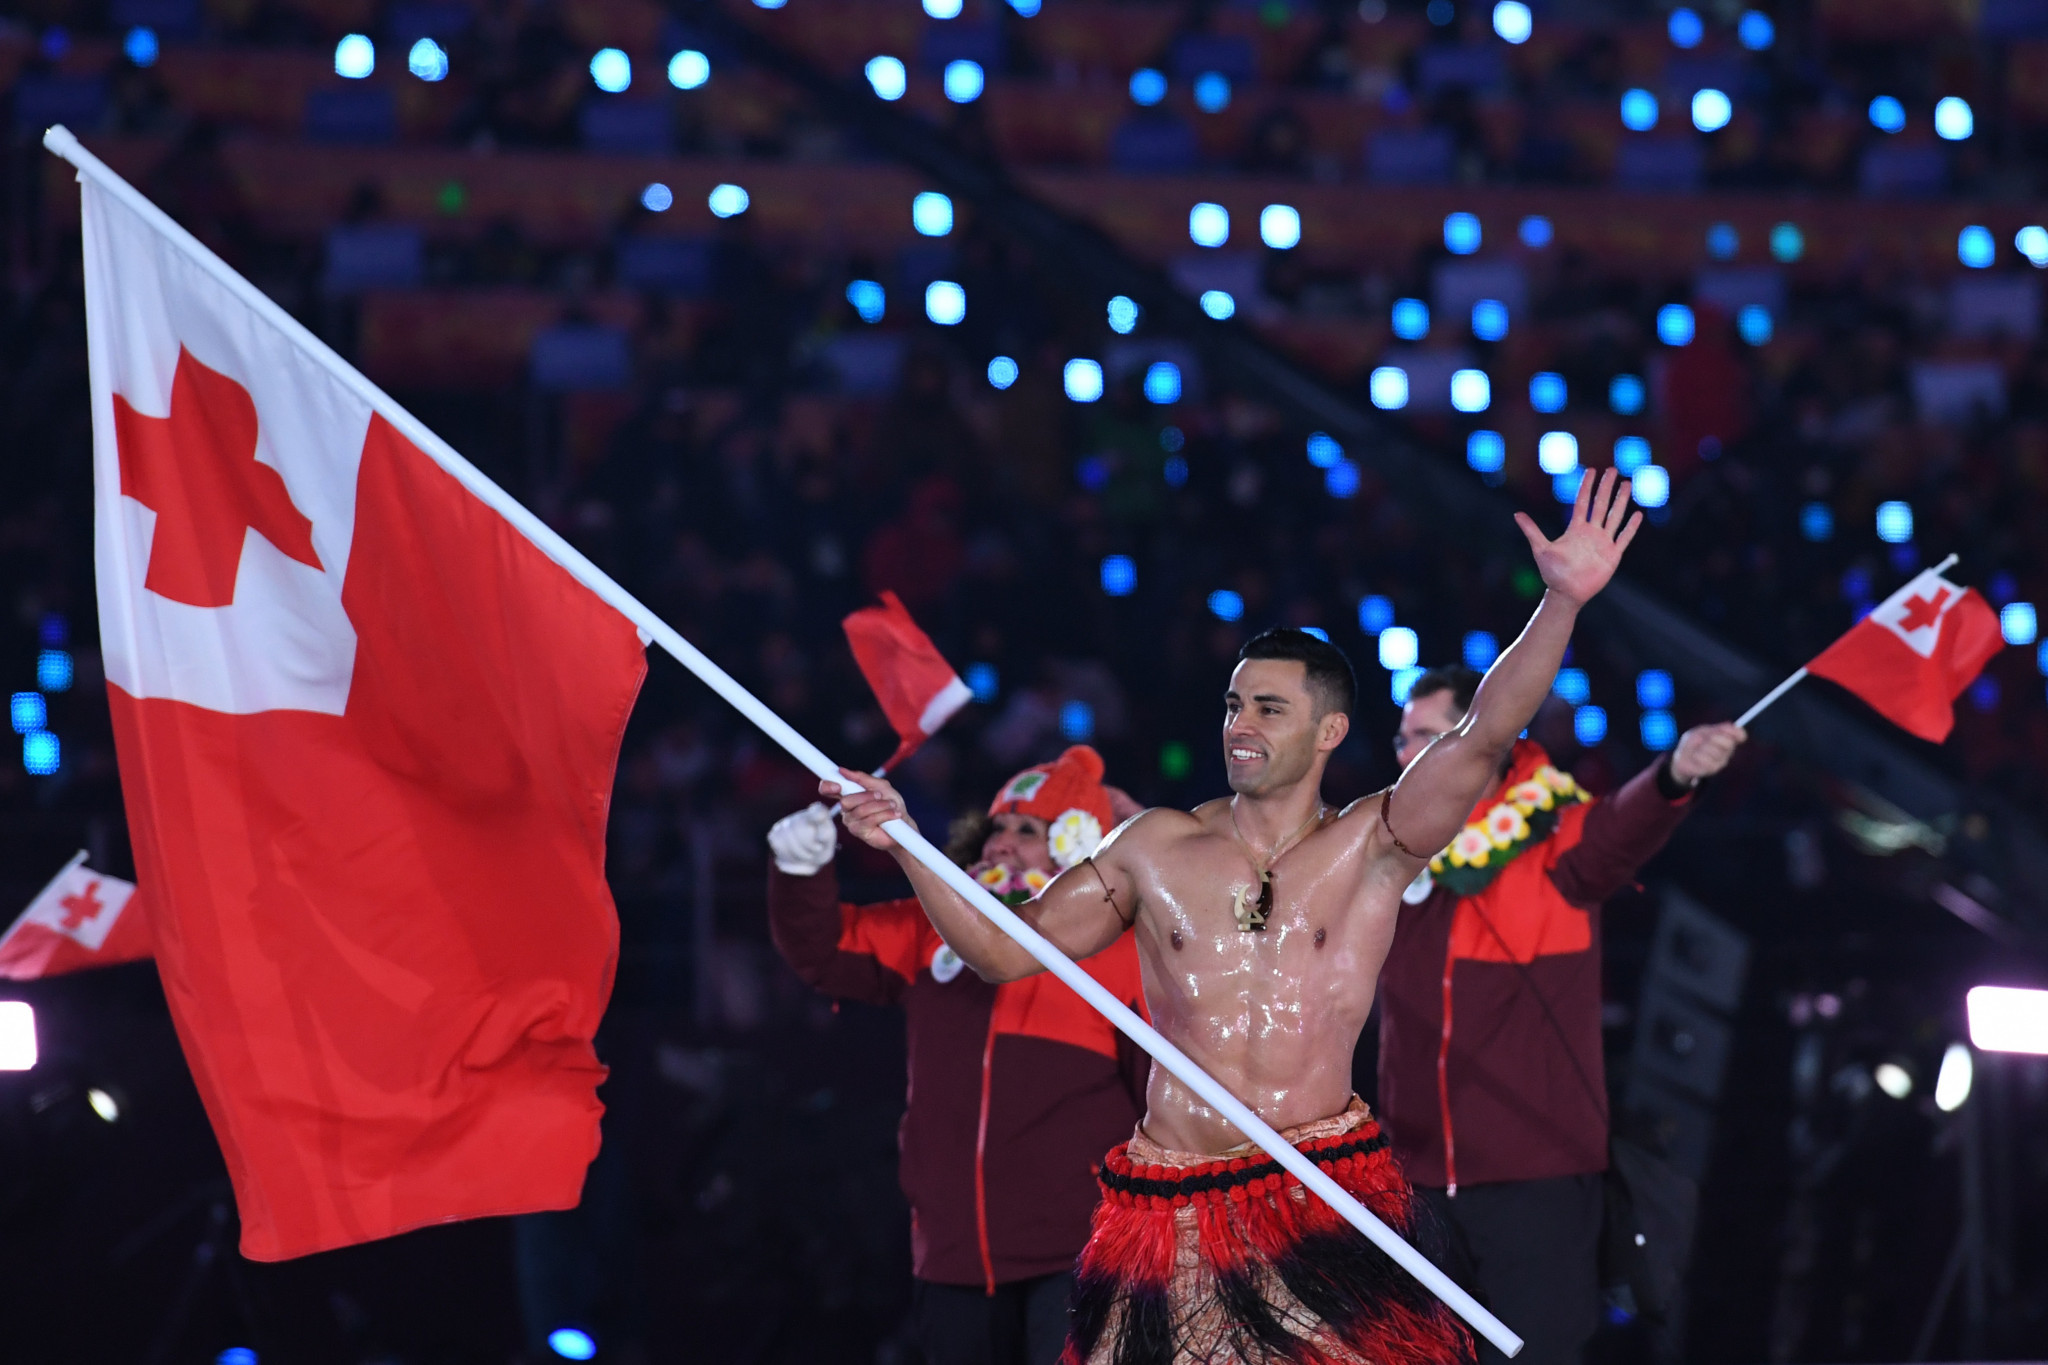 Tongan flagbearer Pita Taufatofua marching topless for the second consecutive Olympic Games Opening Ceremony provided a light-hearted moment ©Getty Images